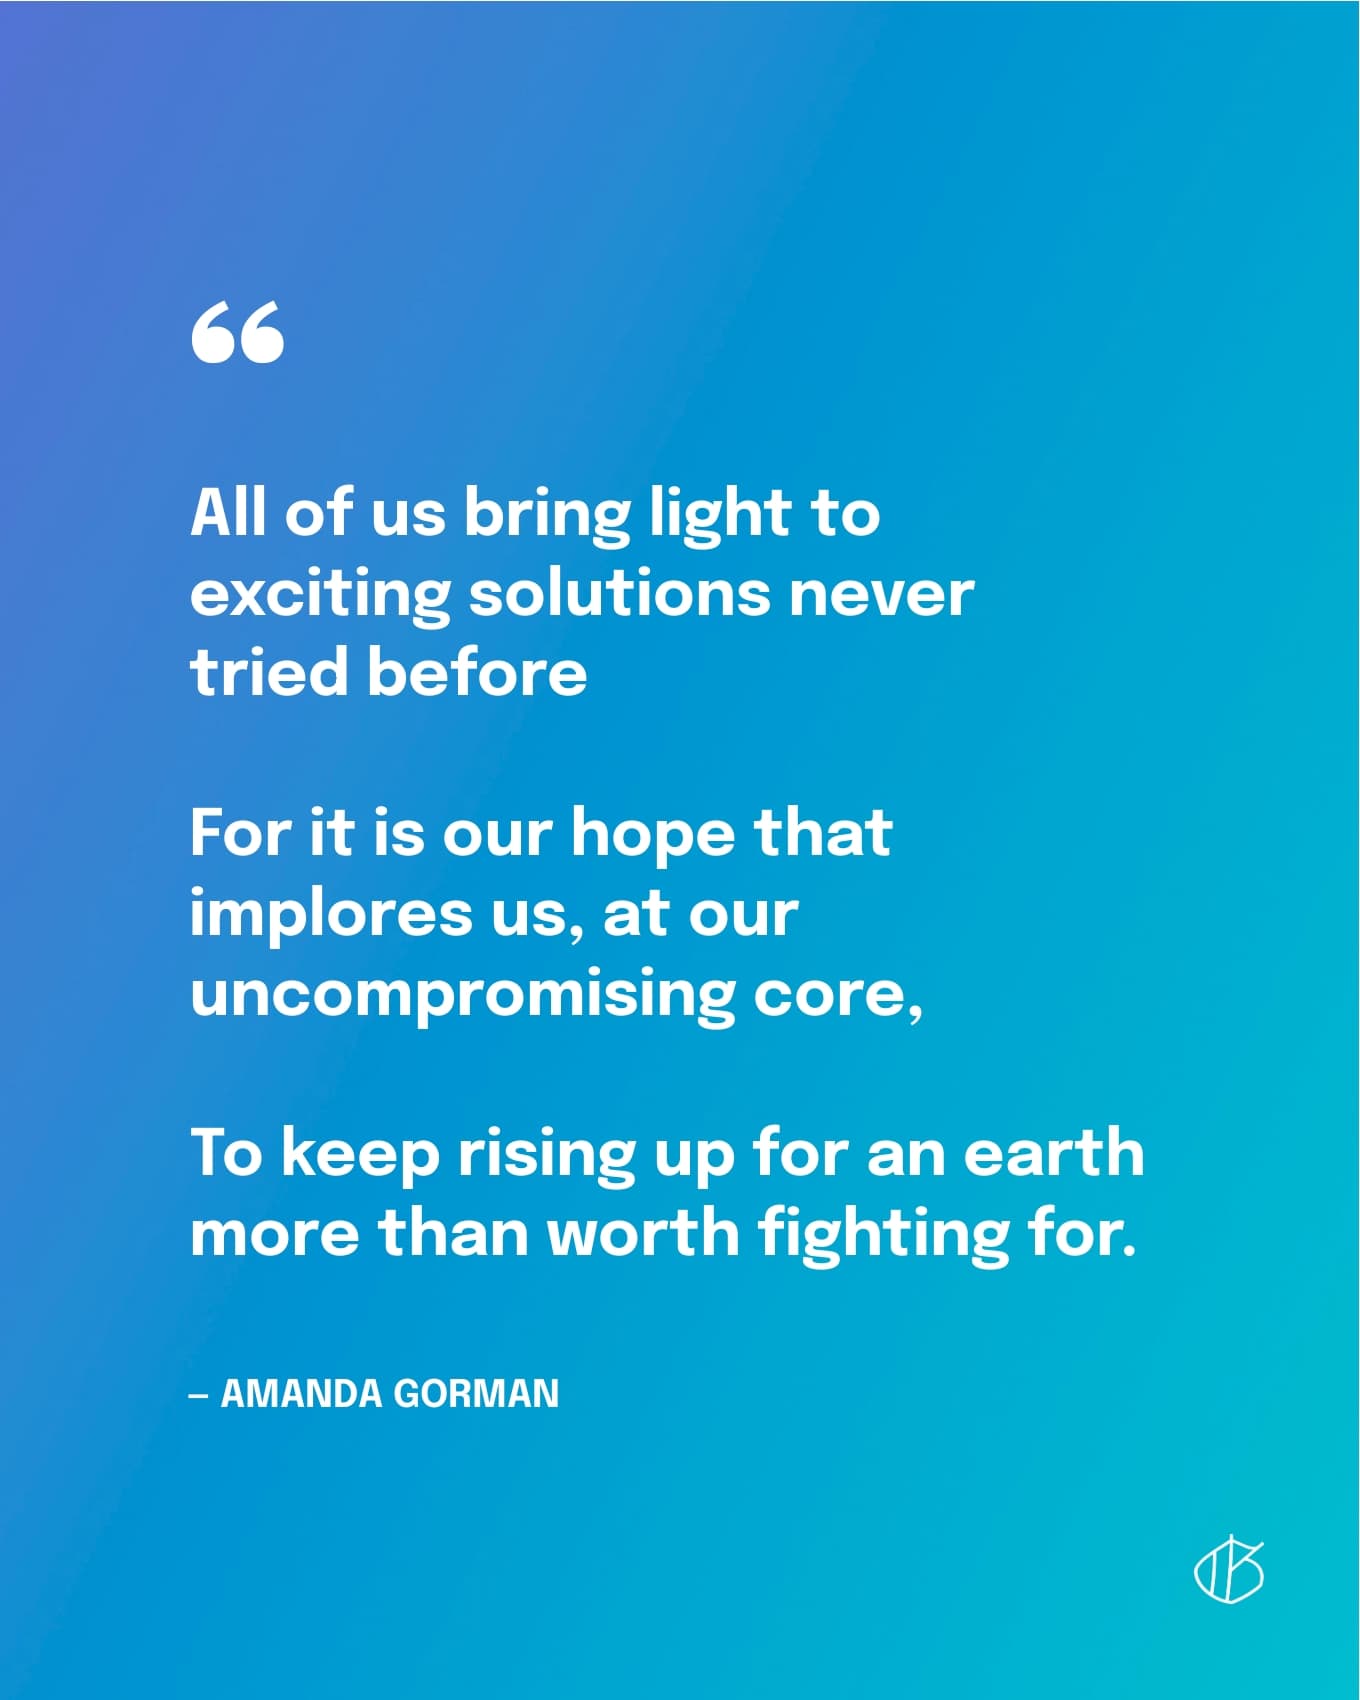 “All of us bring light to exciting solutions never tried beforeFor it is our hope that implores us, at our uncompromising core,To keep rising up for an earth more than worth fighting for.” — Amanda Gorman